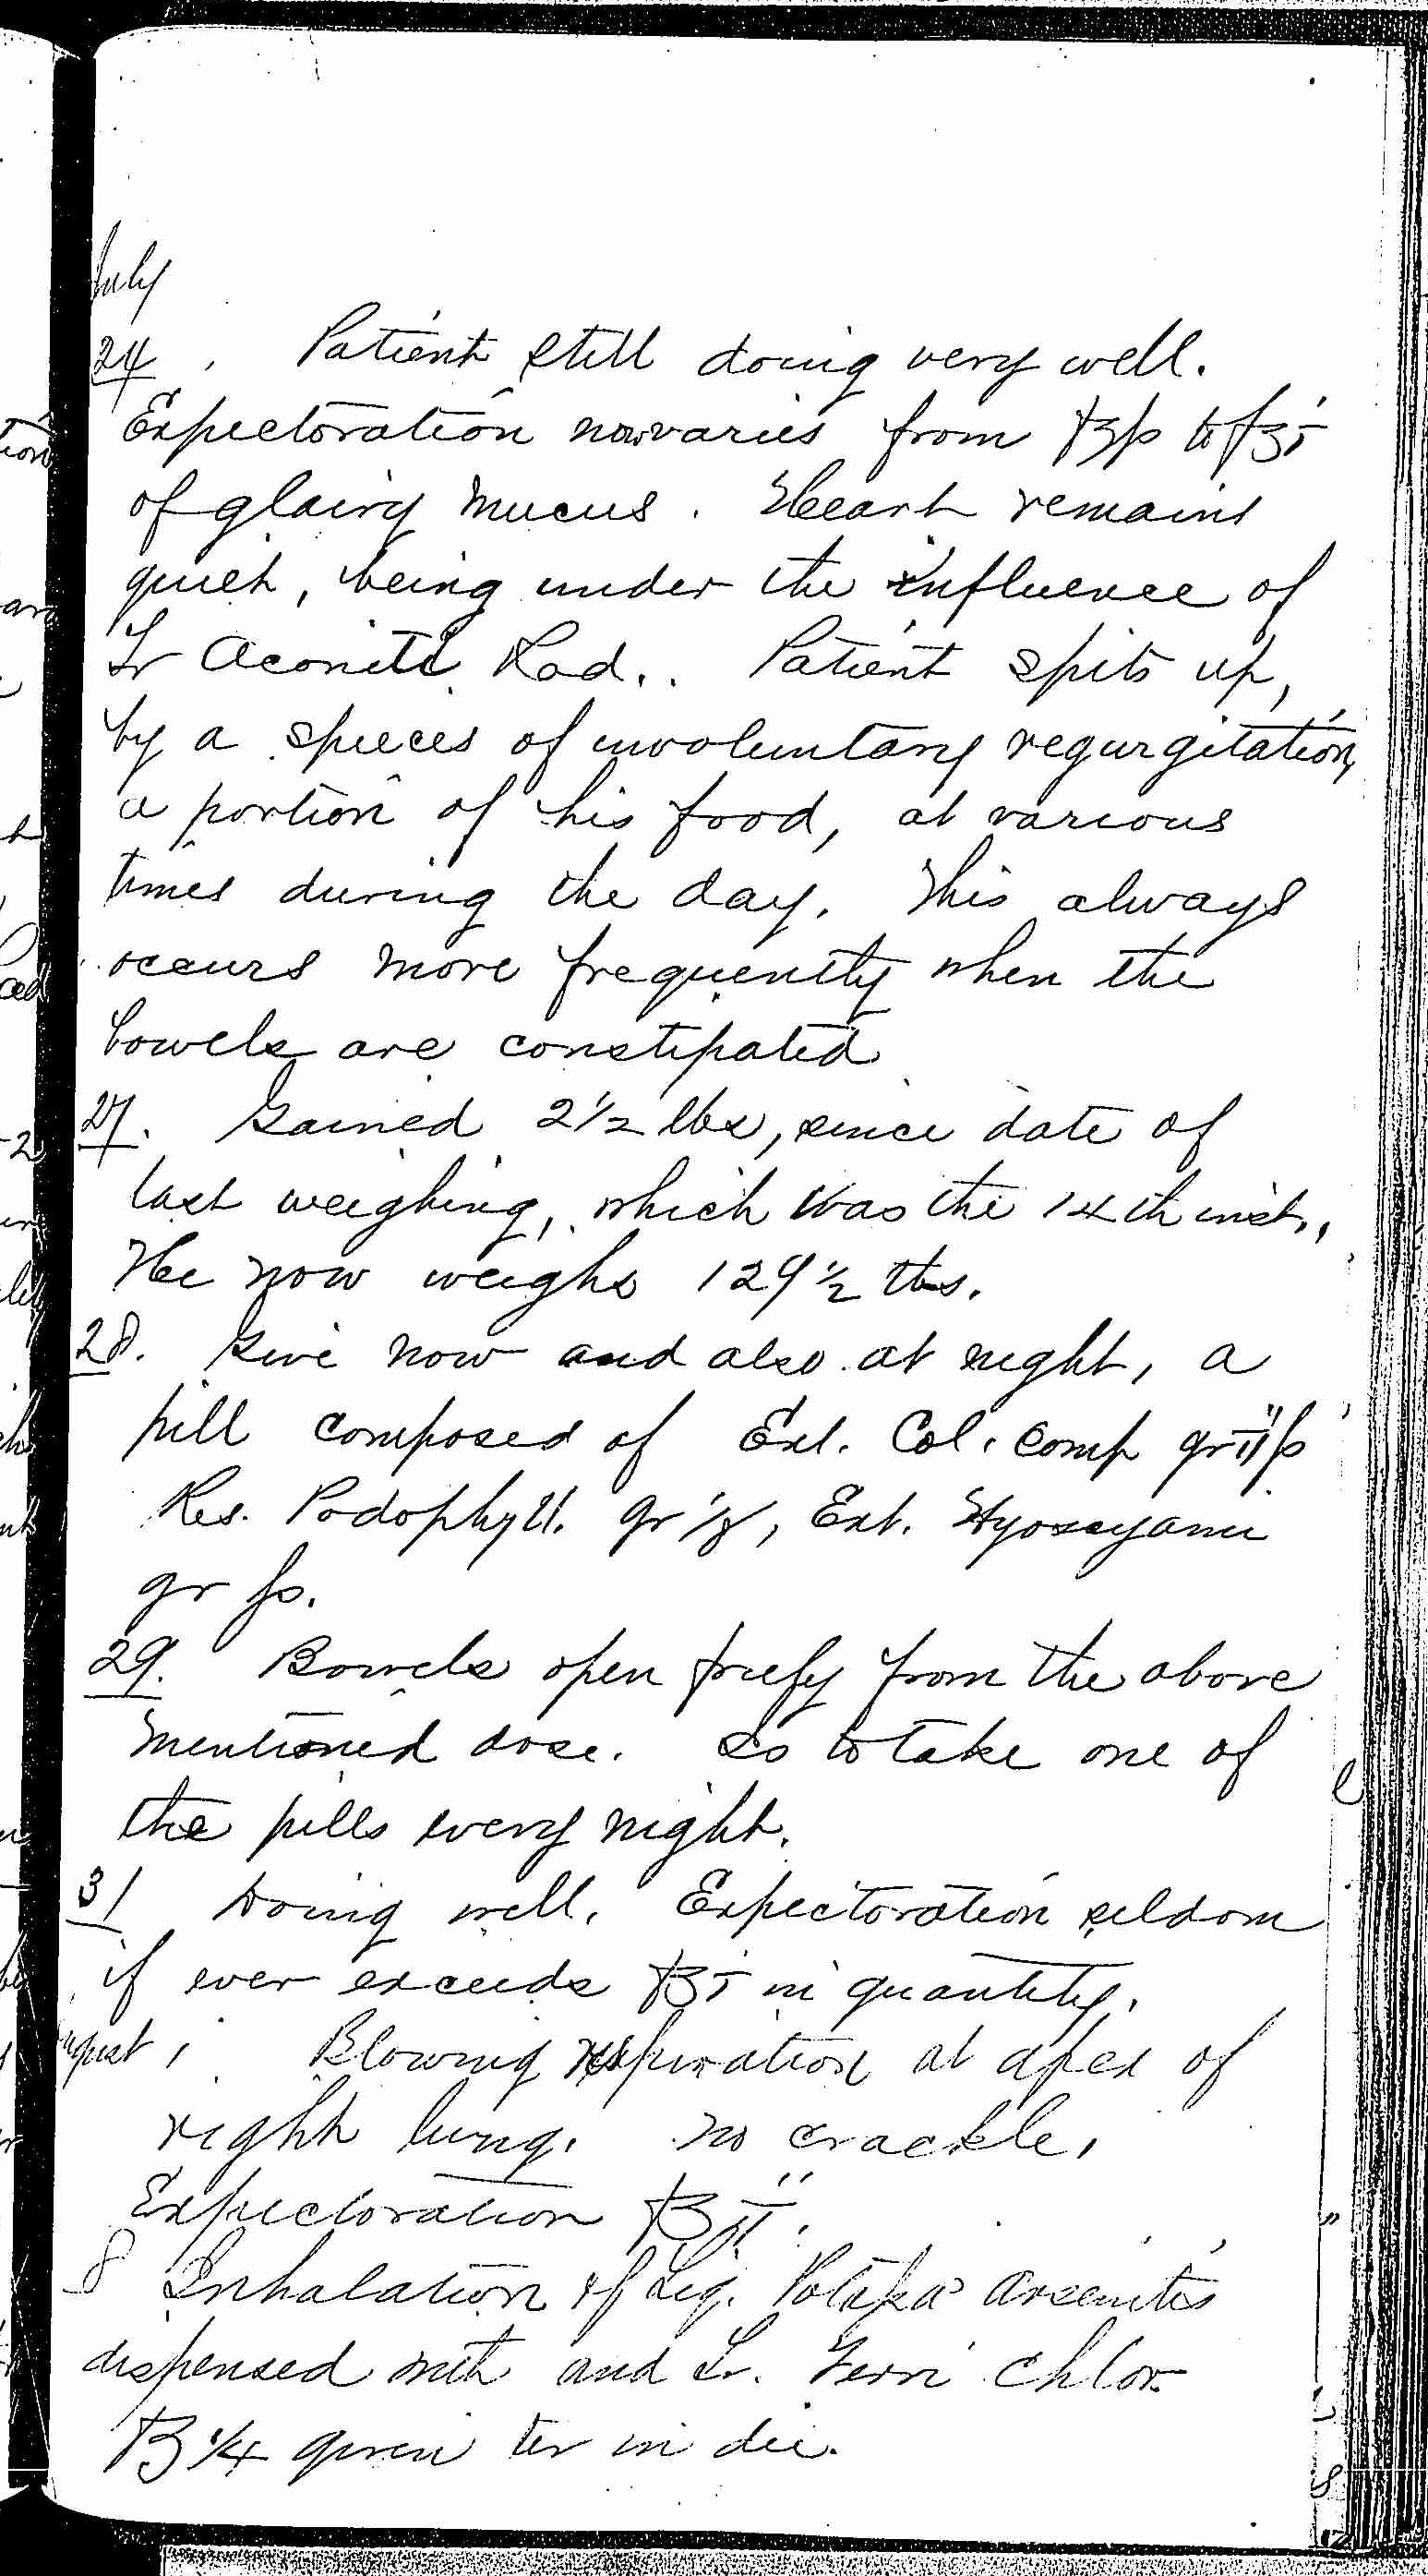 Entry for Francis Brannigan (page 5 of 6) in the log Hospital Tickets and Case Papers - Naval Hospital - Washington, D.C. - 1868-69